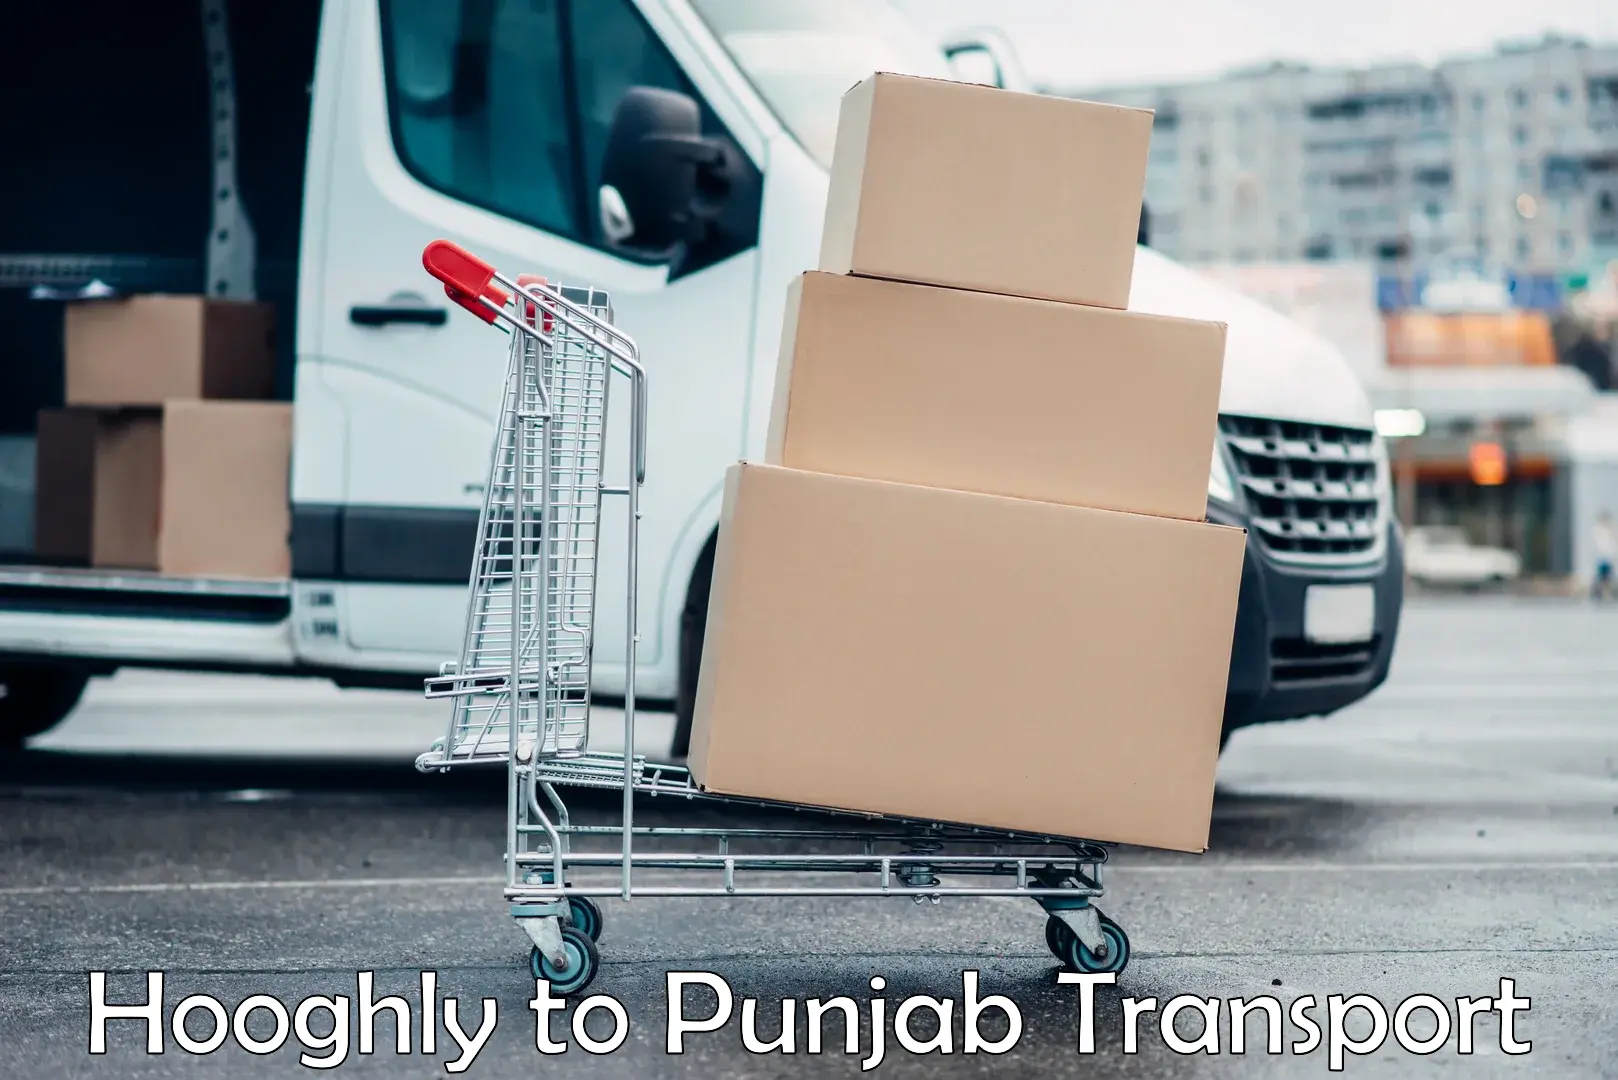 Goods delivery service Hooghly to Begowal